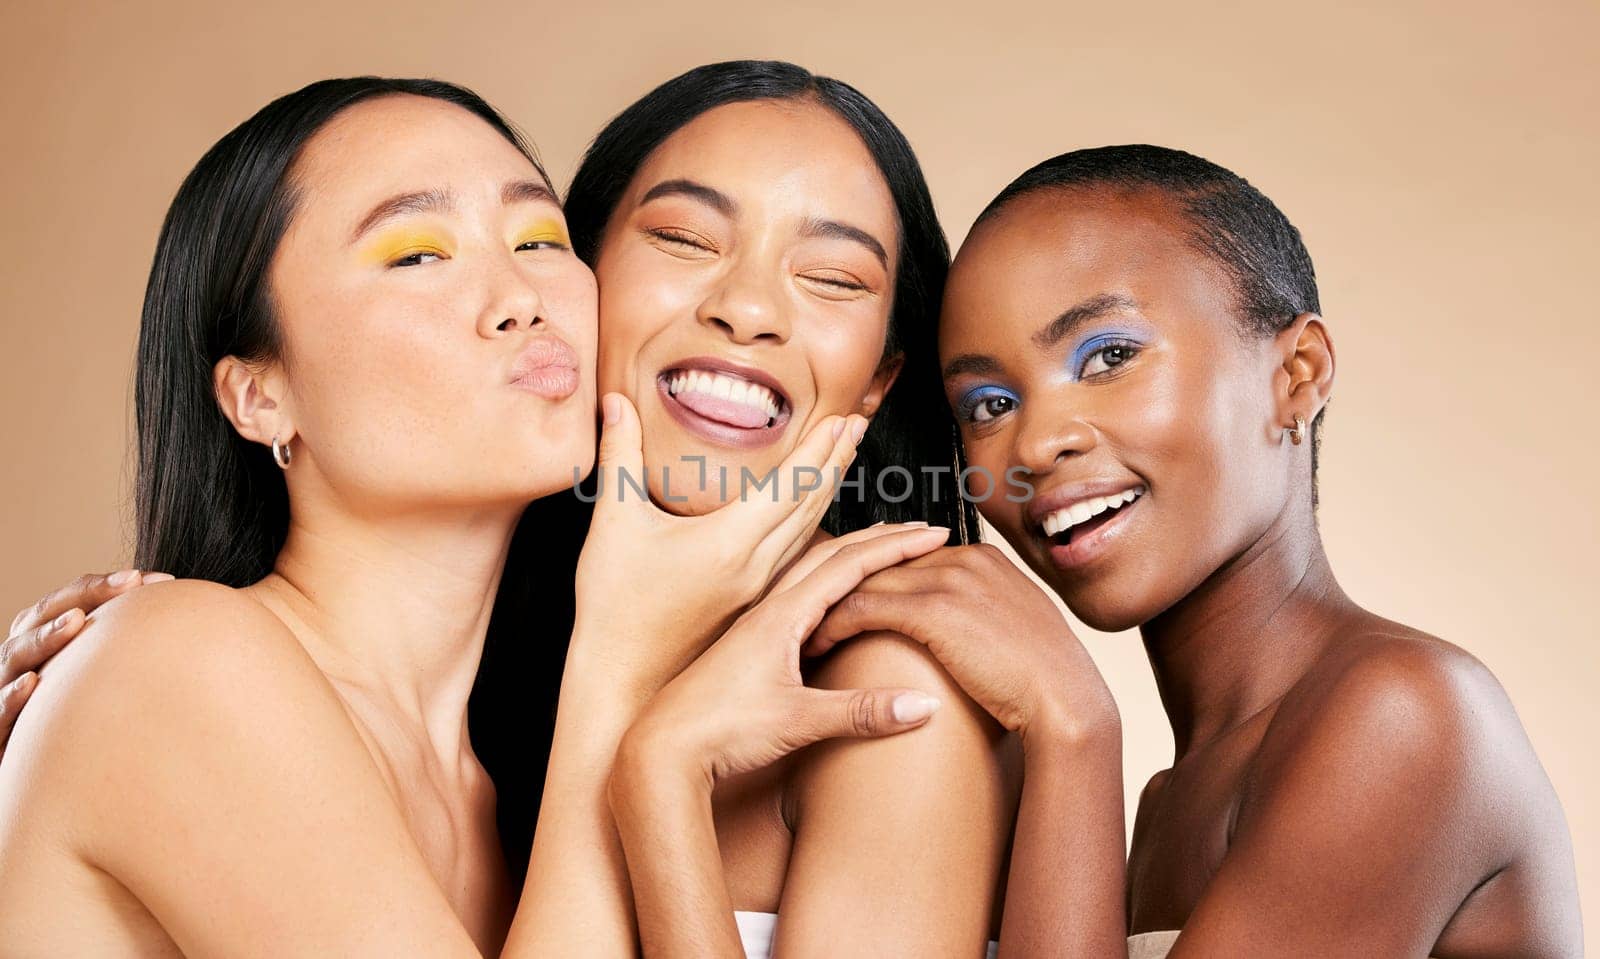 Happy women, portrait smile and face in beauty for skincare, cosmetics or makeup against a studio background. People, friends or models smiling in happiness or satisfaction for fun healthy treatment.